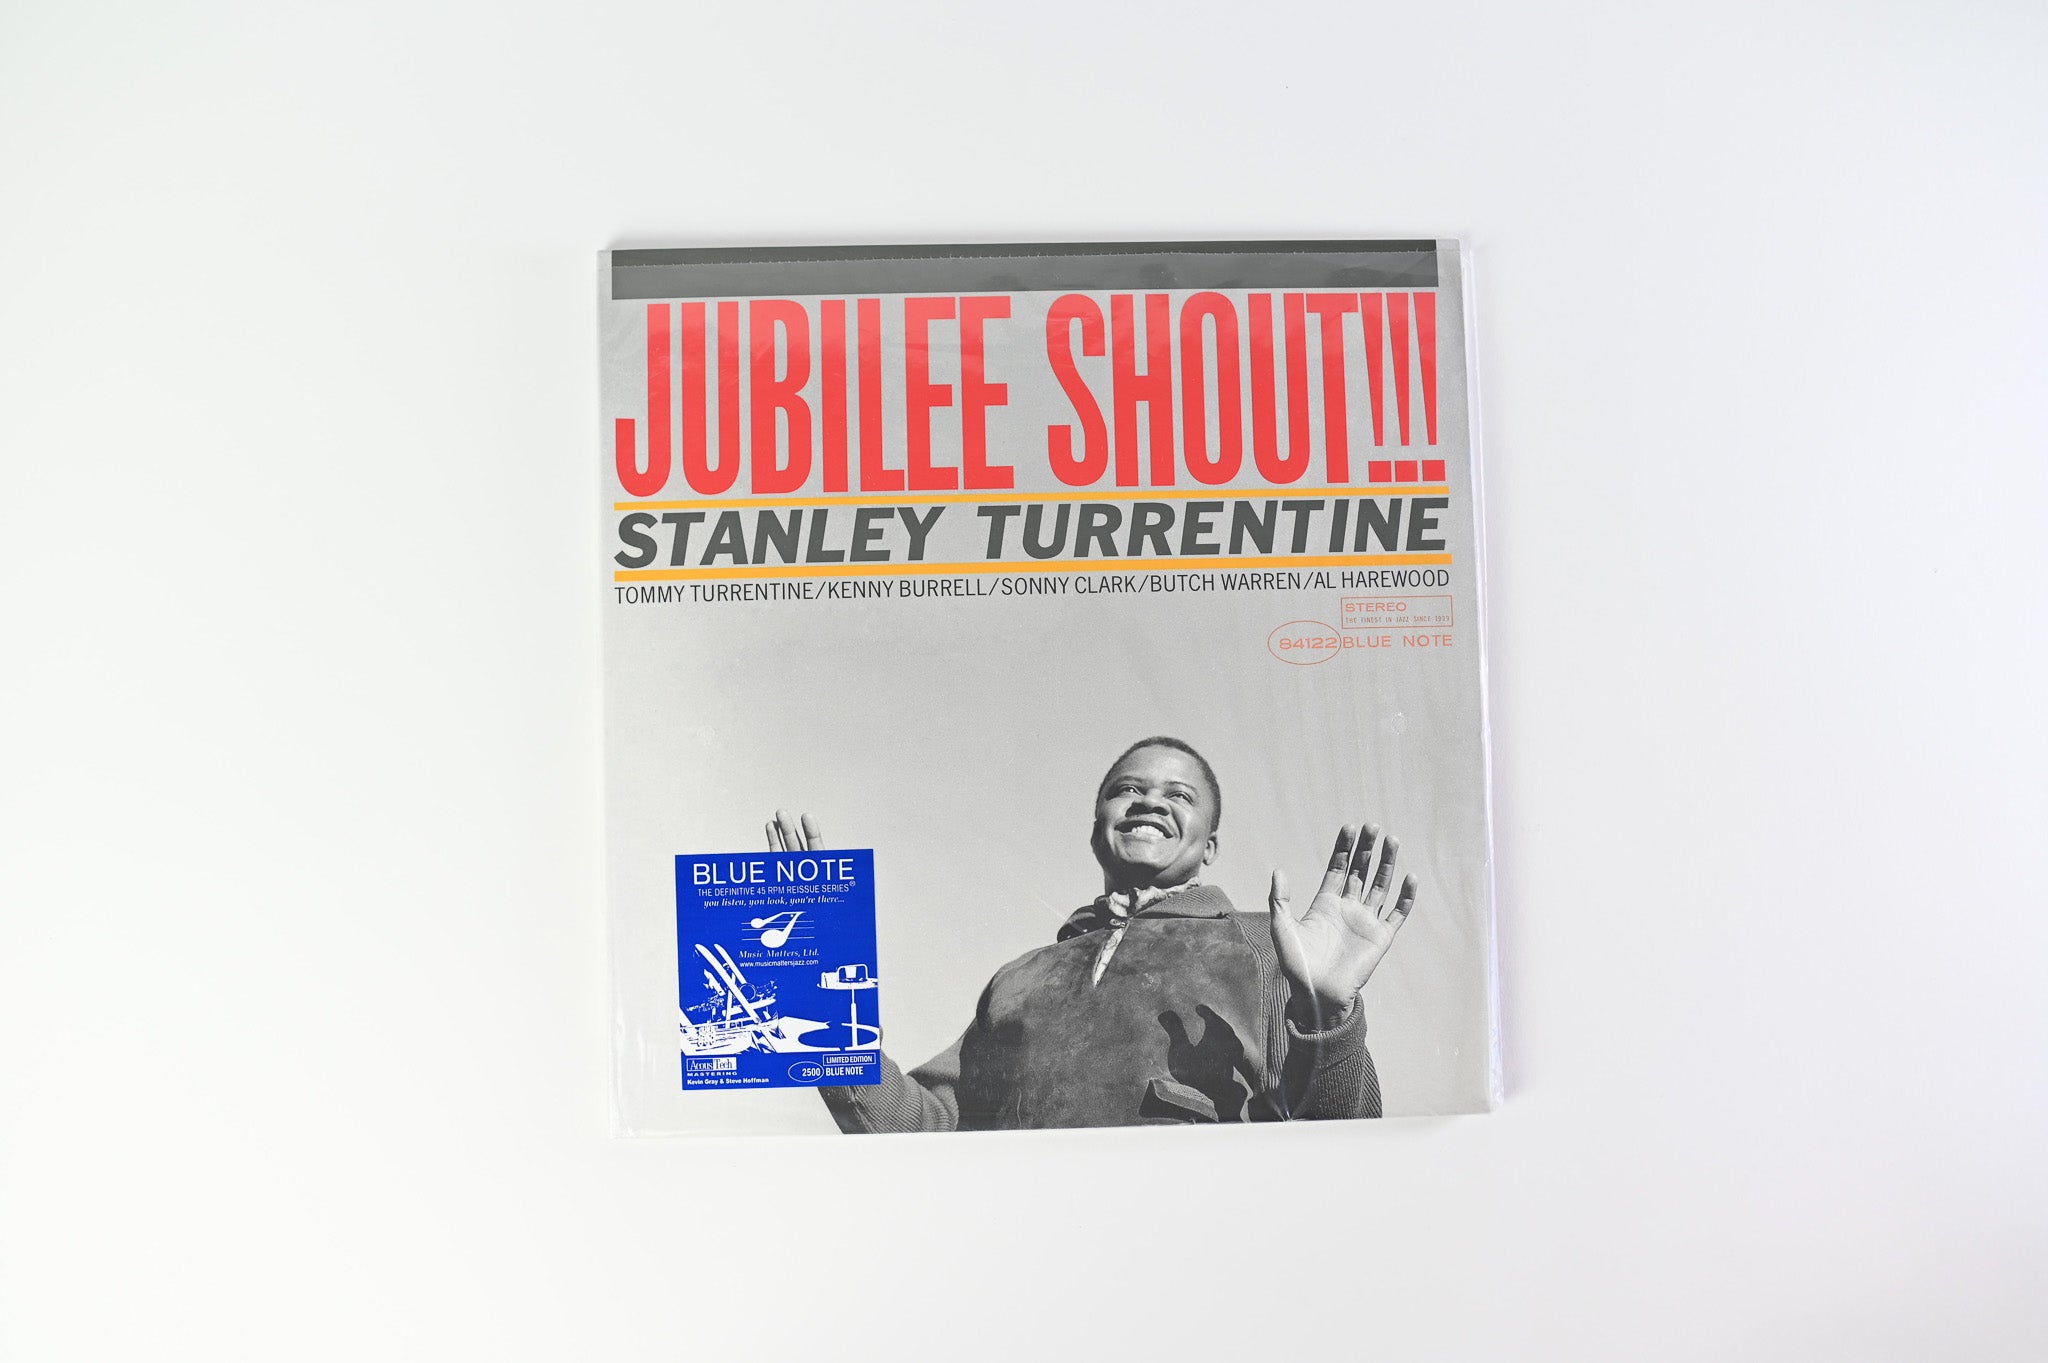 Stanley Turrentine - Jubilee Shout!!! on Blue Note Music Matters Ltd Numbered Reissue 45 RPM